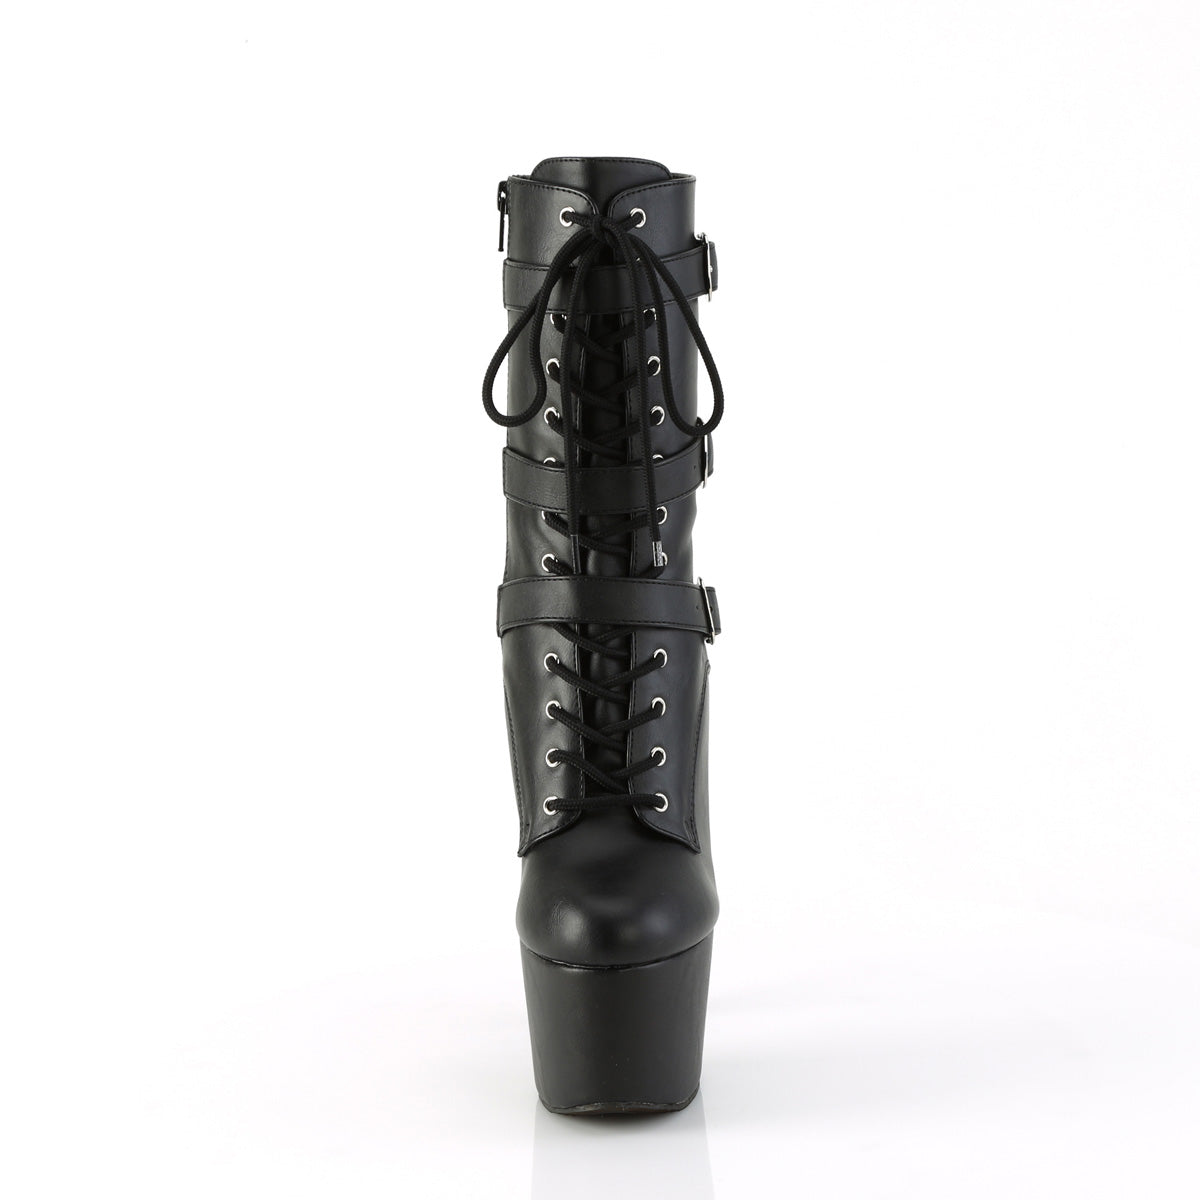 ADORE-1043 Pleaser Fetish Black Faux Leather Exotic Dancing Mid-Calf Boots